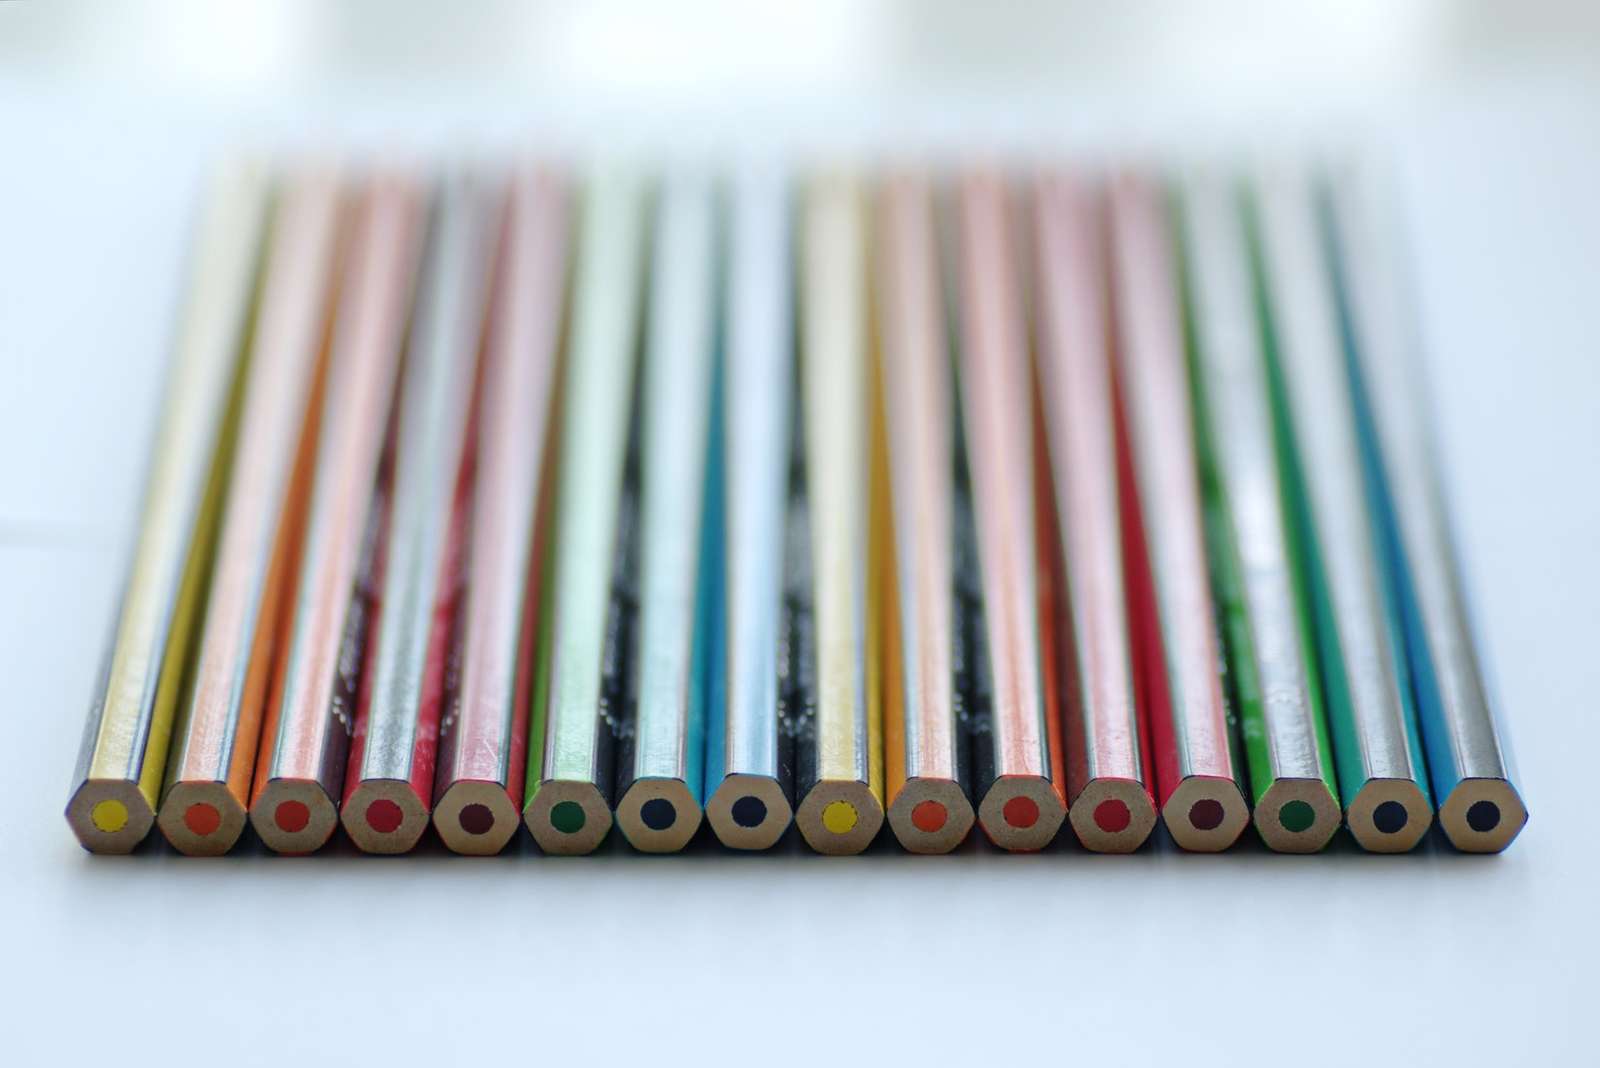 Stacking pencils online puzzle